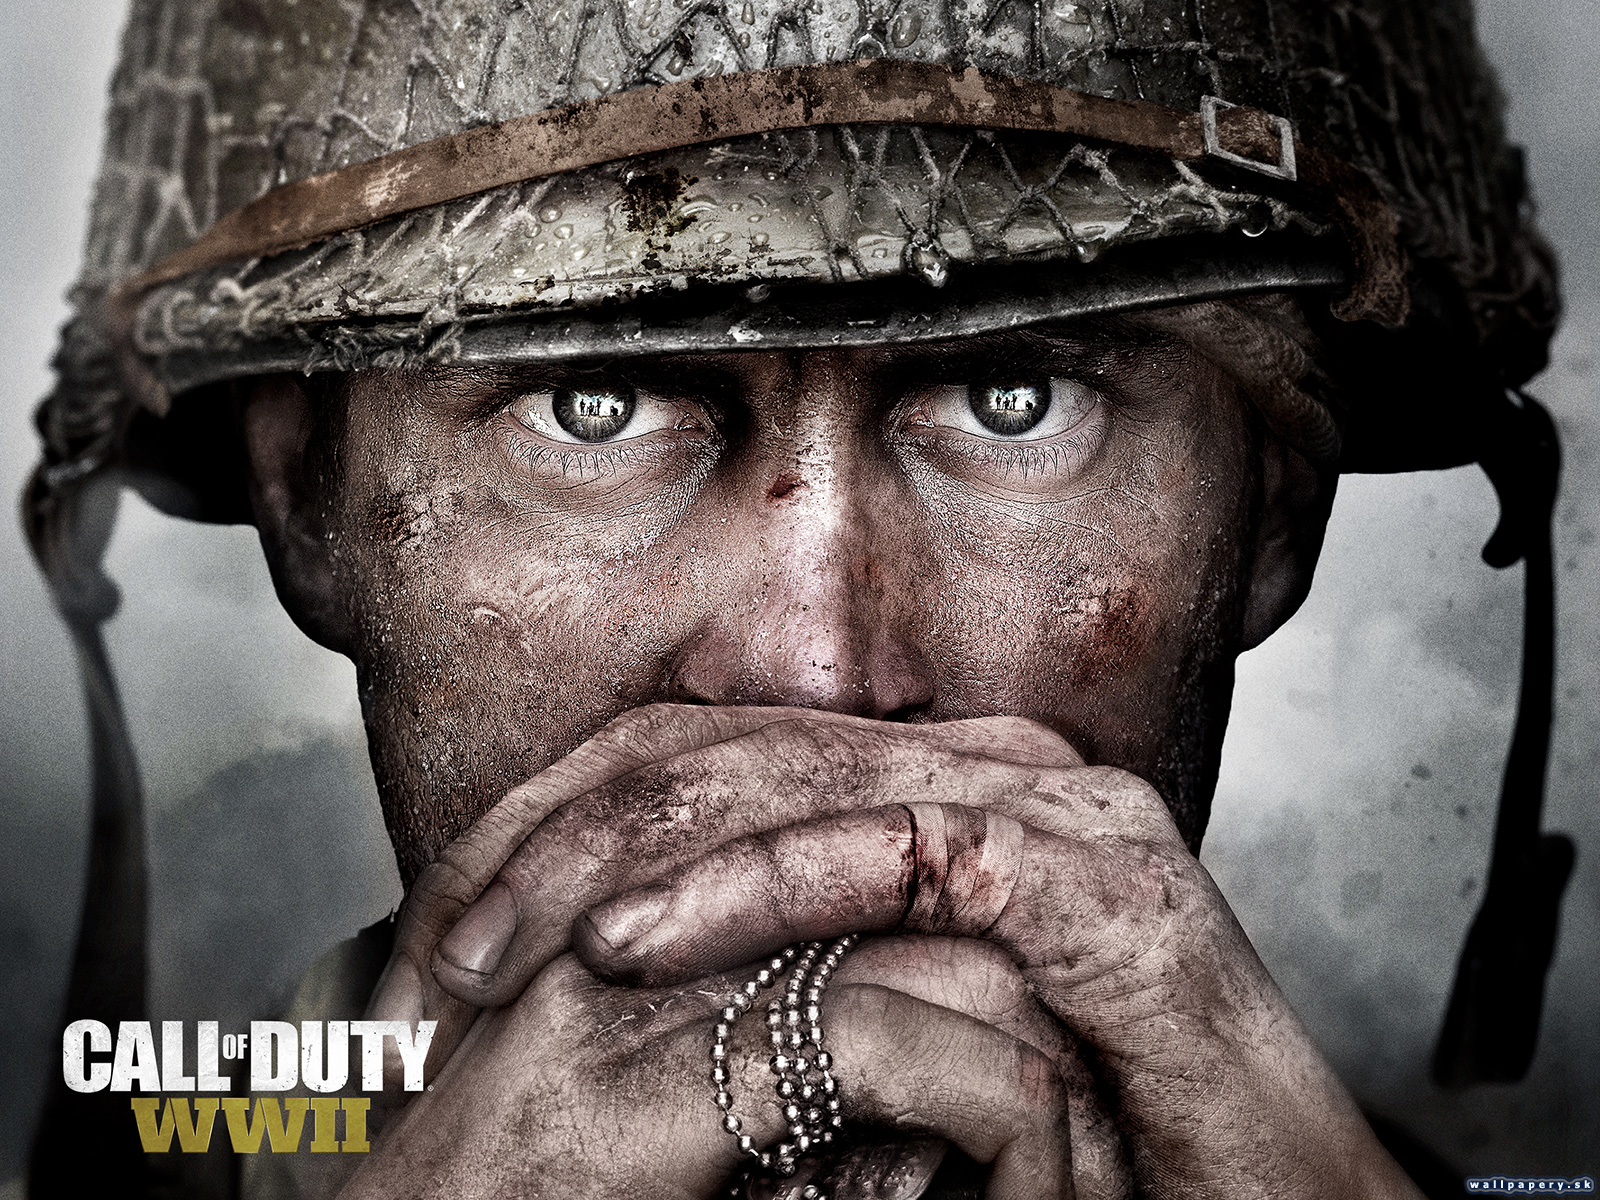 Call of Duty: WWII - wallpaper 1